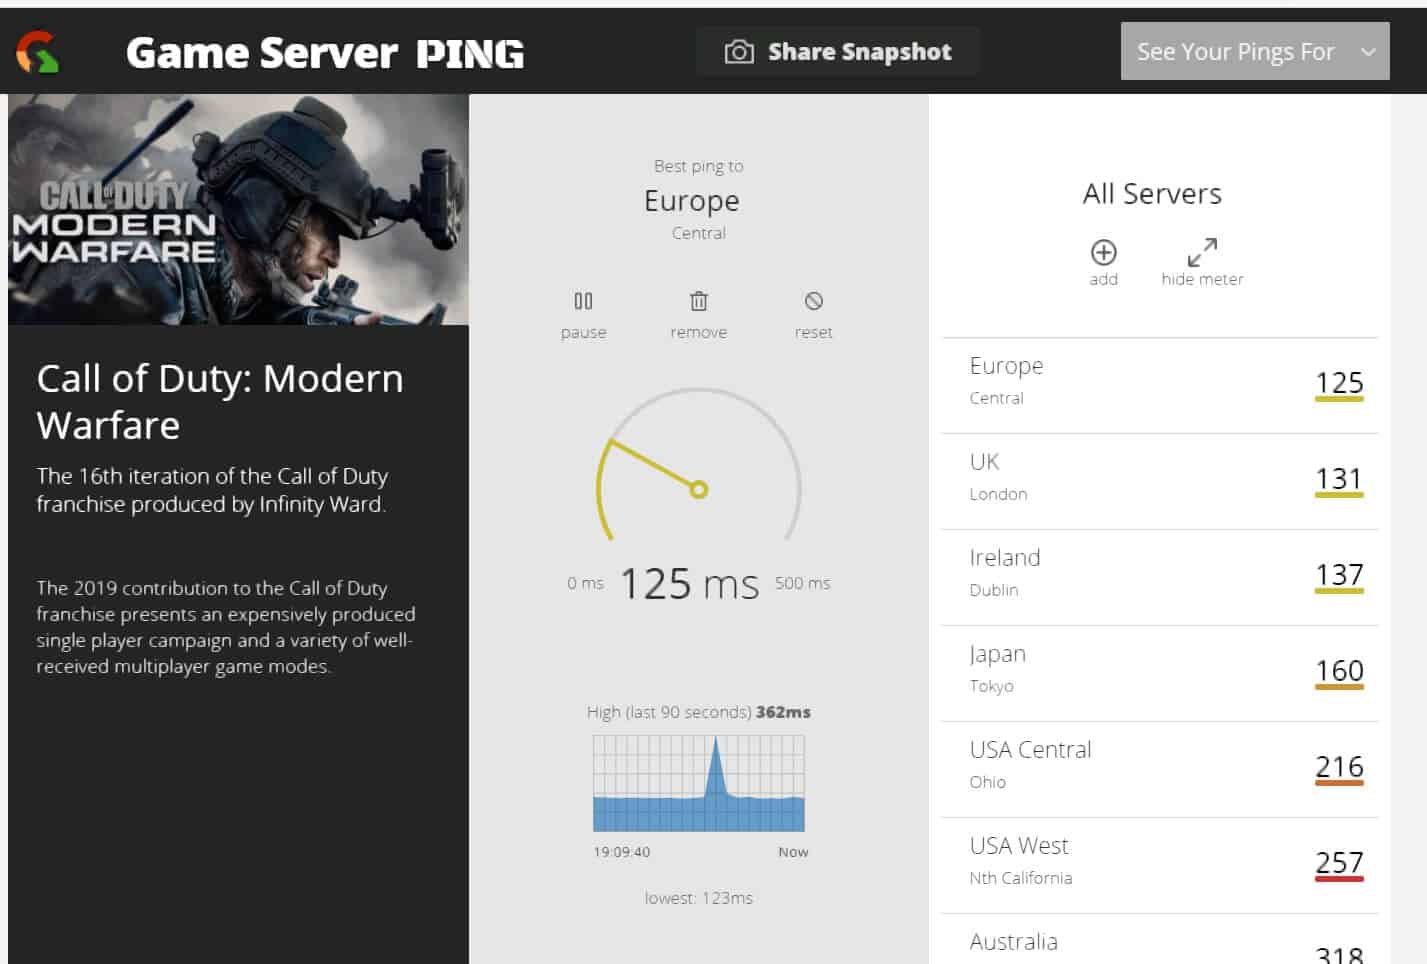 How To Reduce Ping For Online Gaming - Say Goodbye To Lag